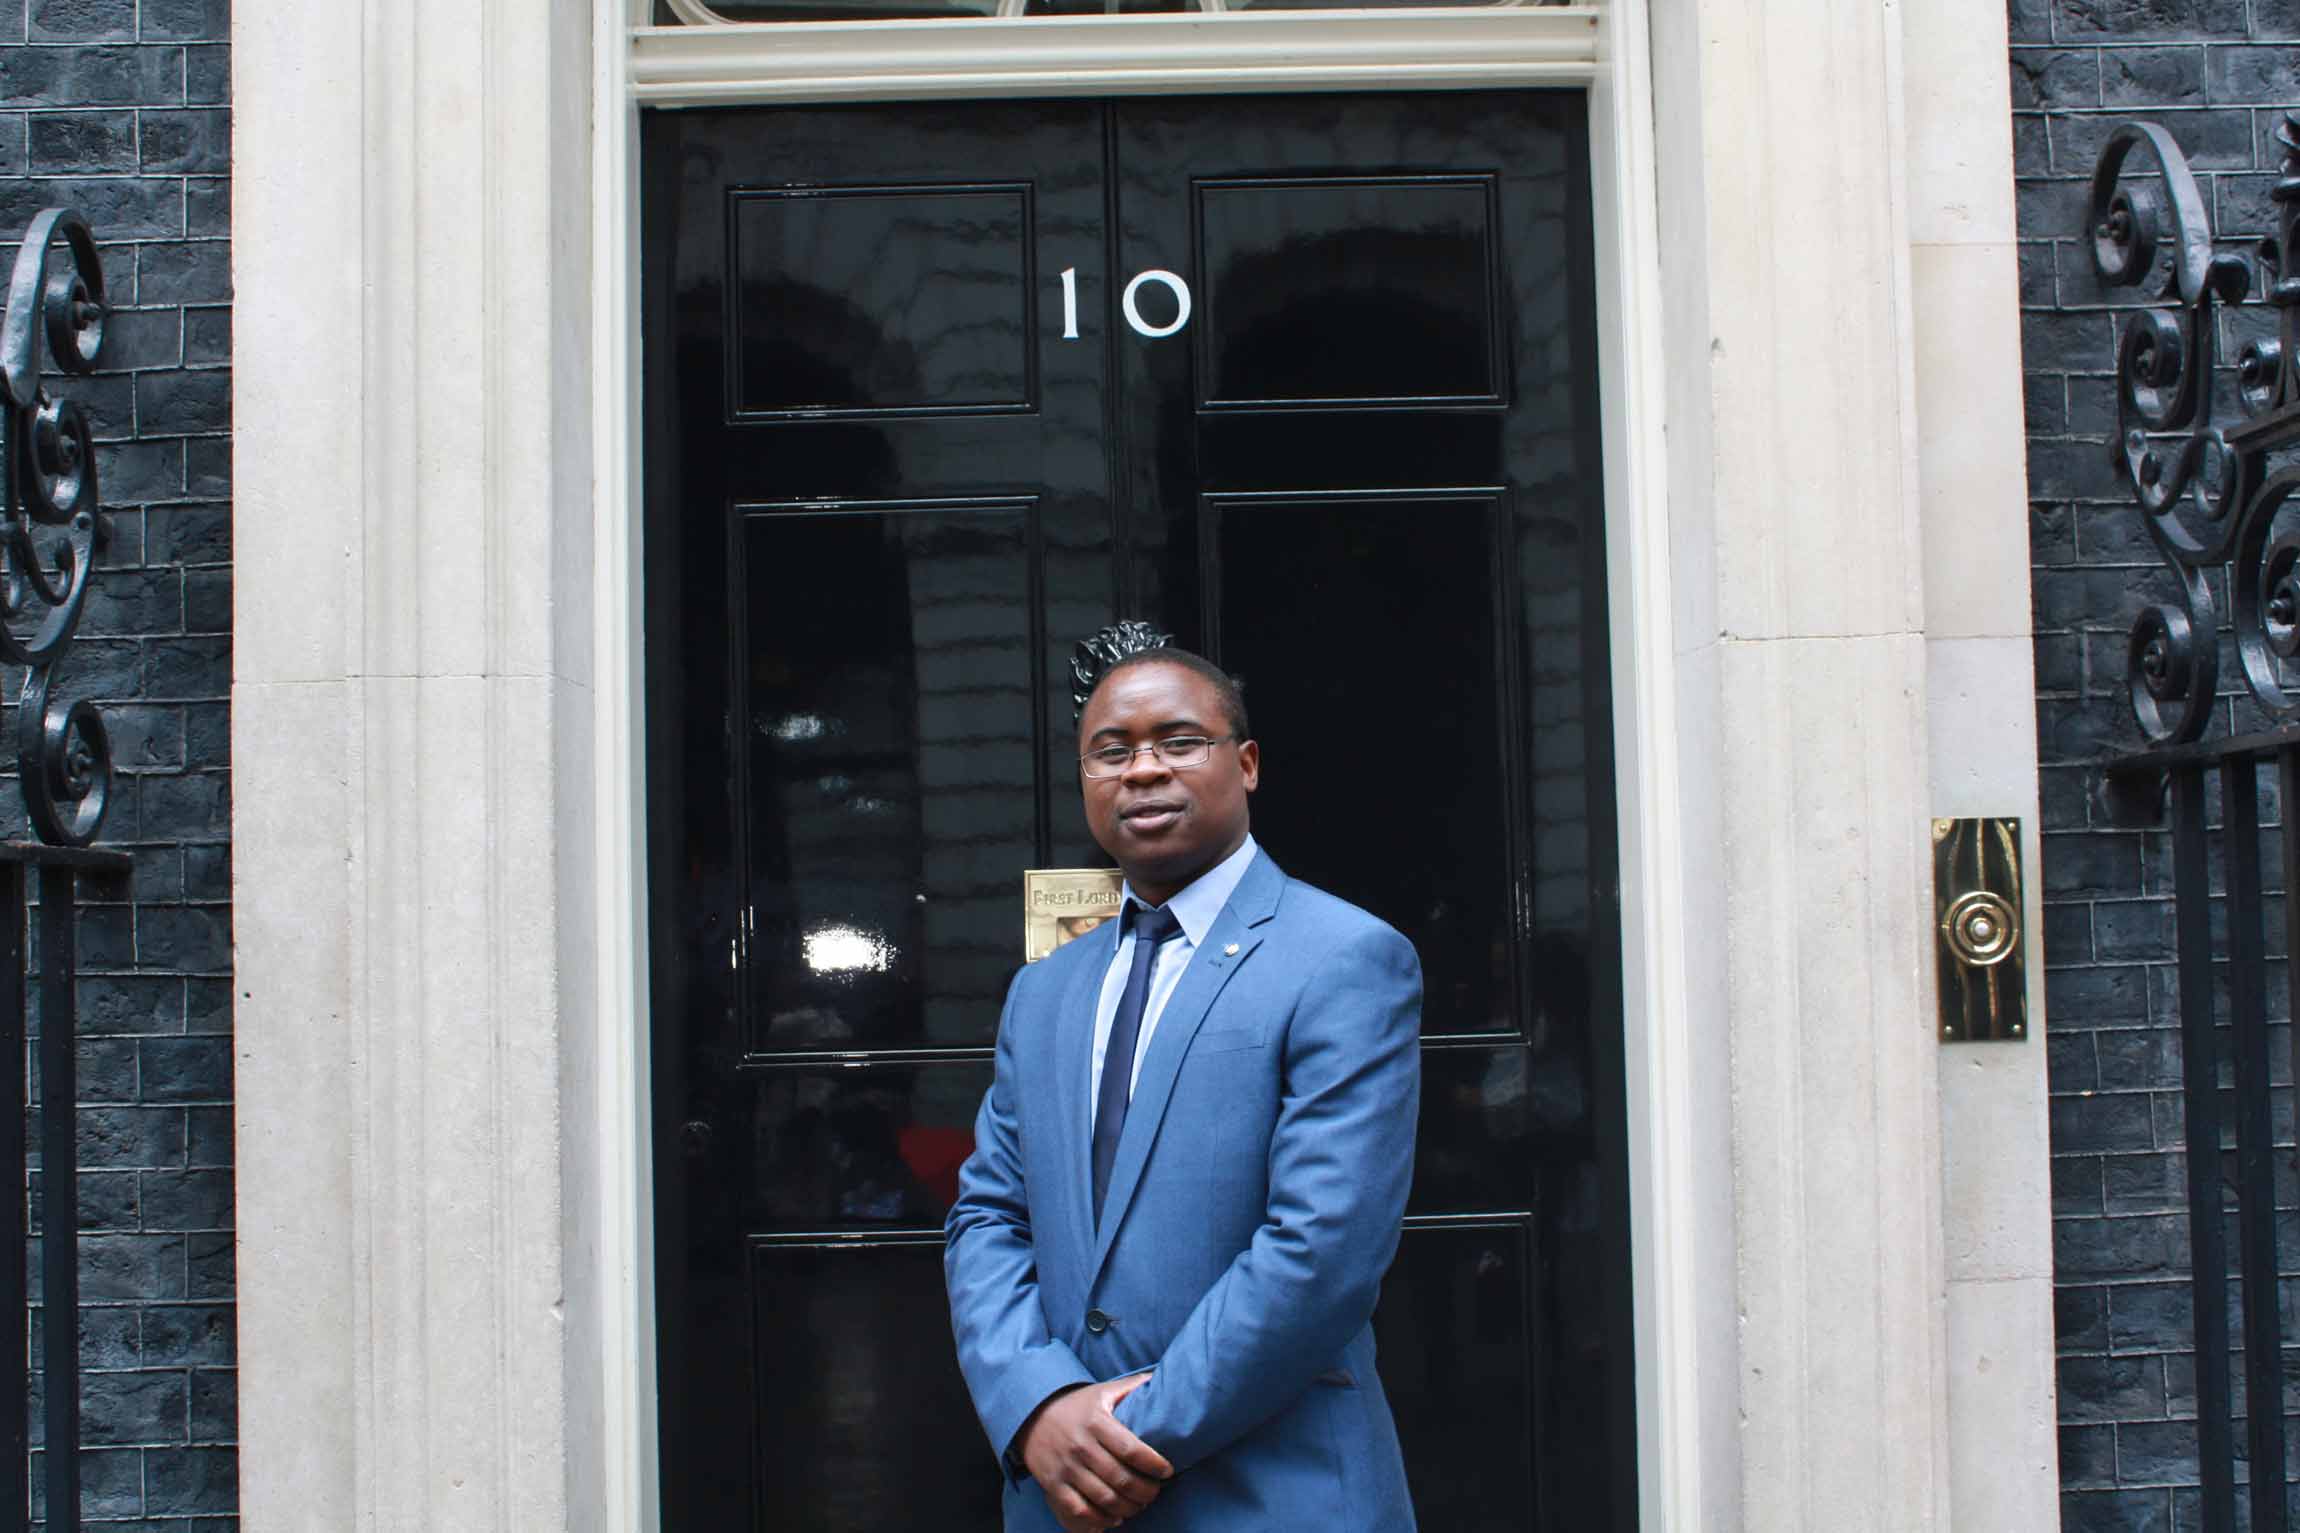 Blessed at Number 10